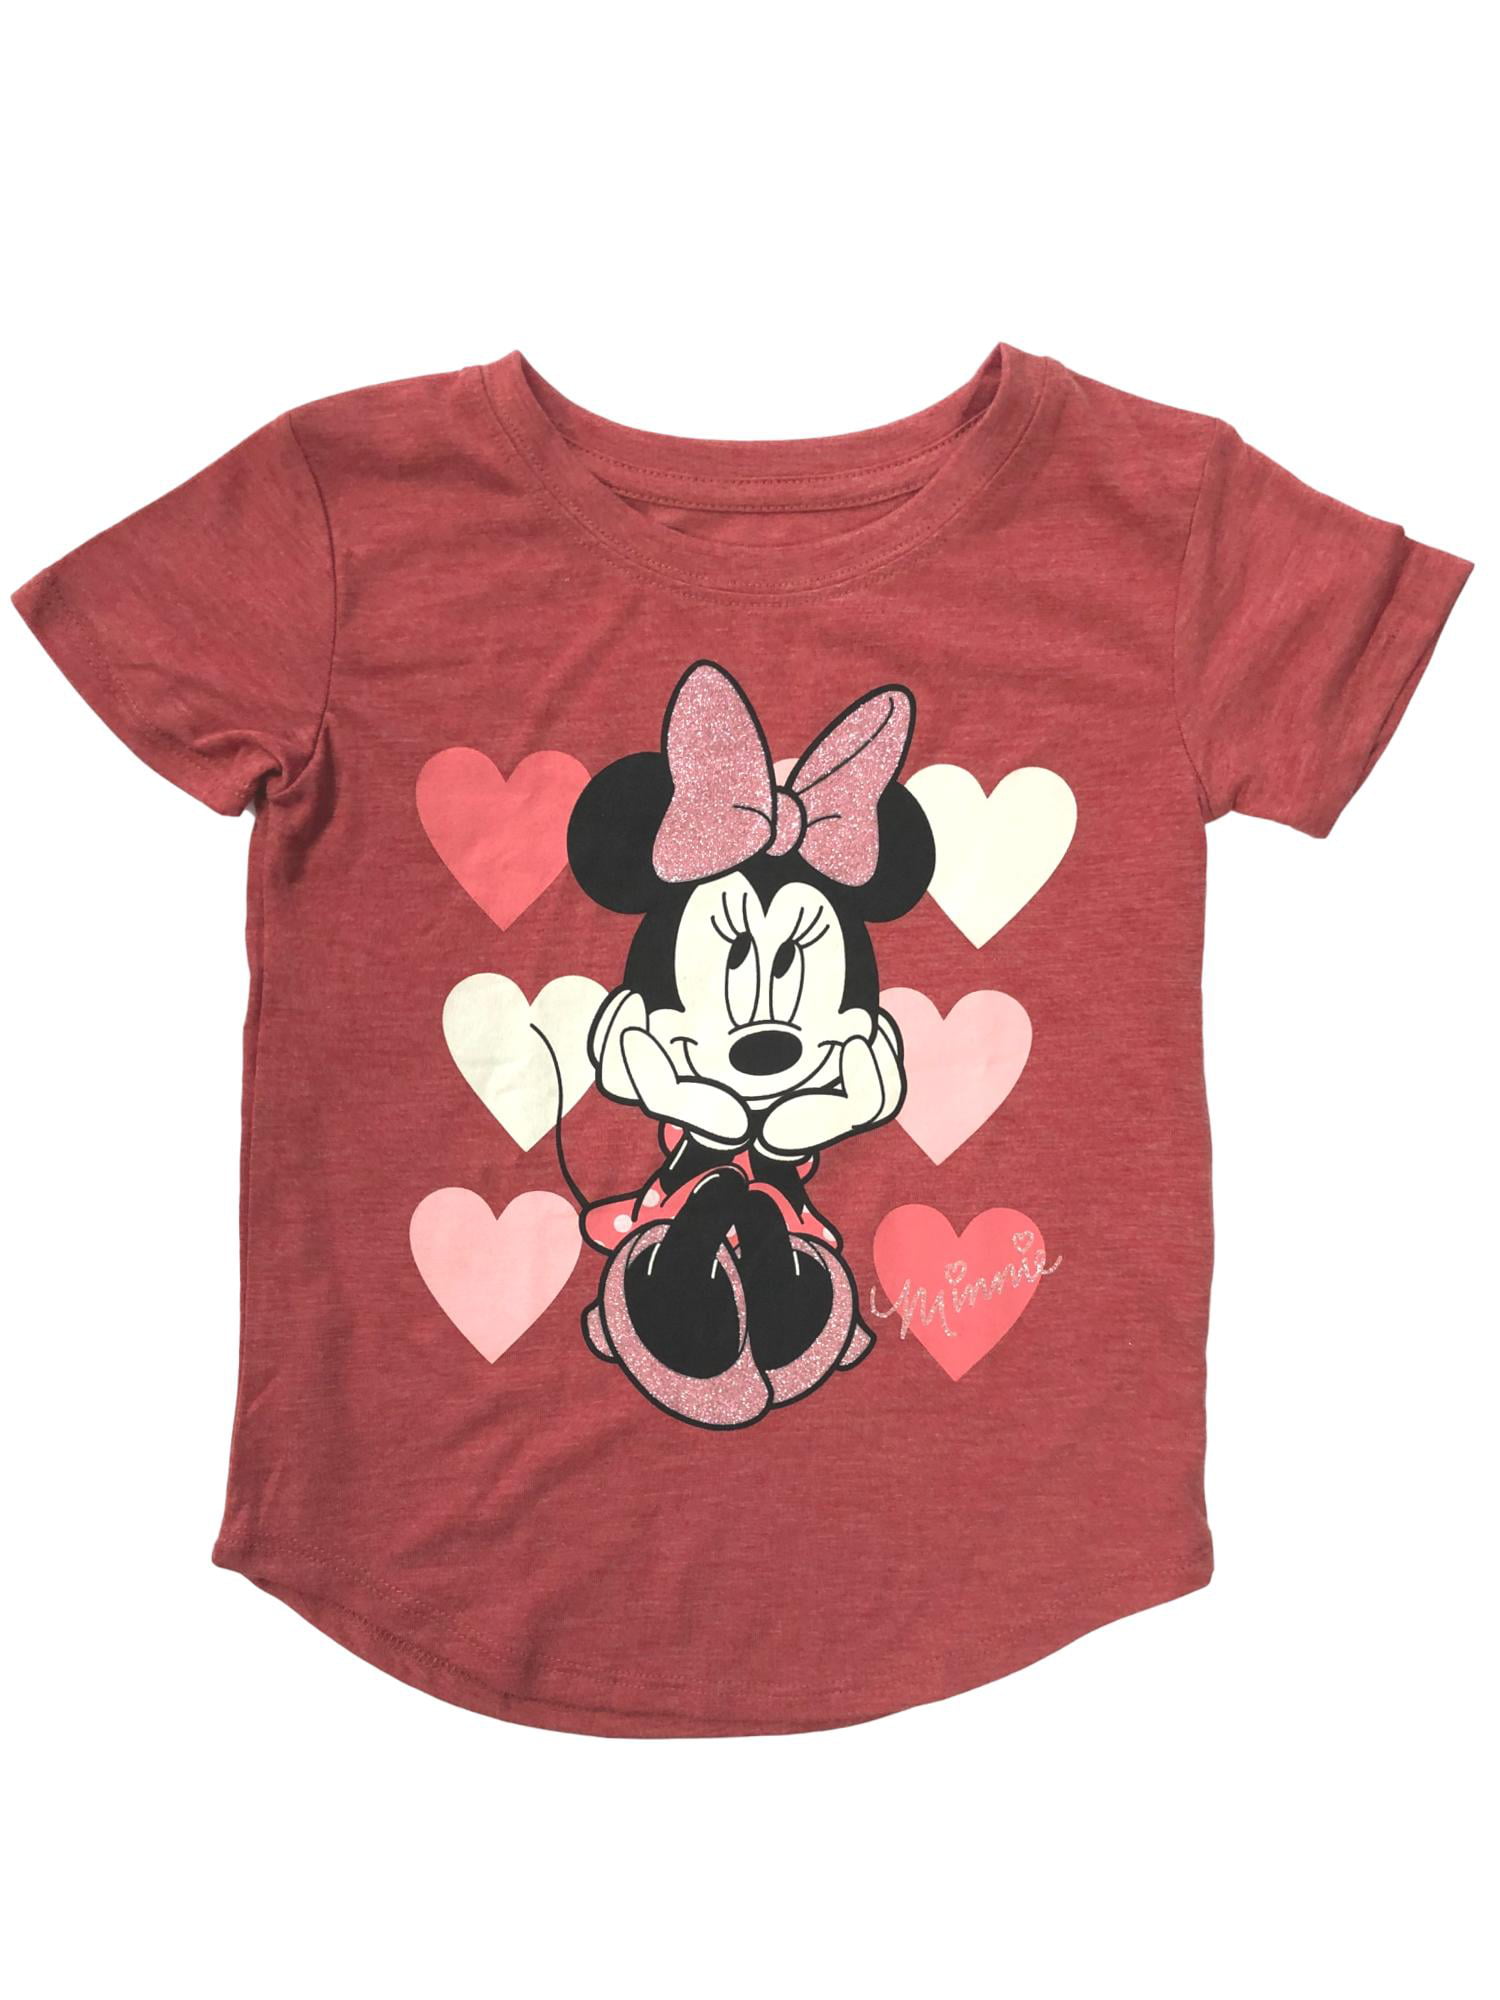 Disney Disney Toddler Girls Red Heart Minnie Mouse